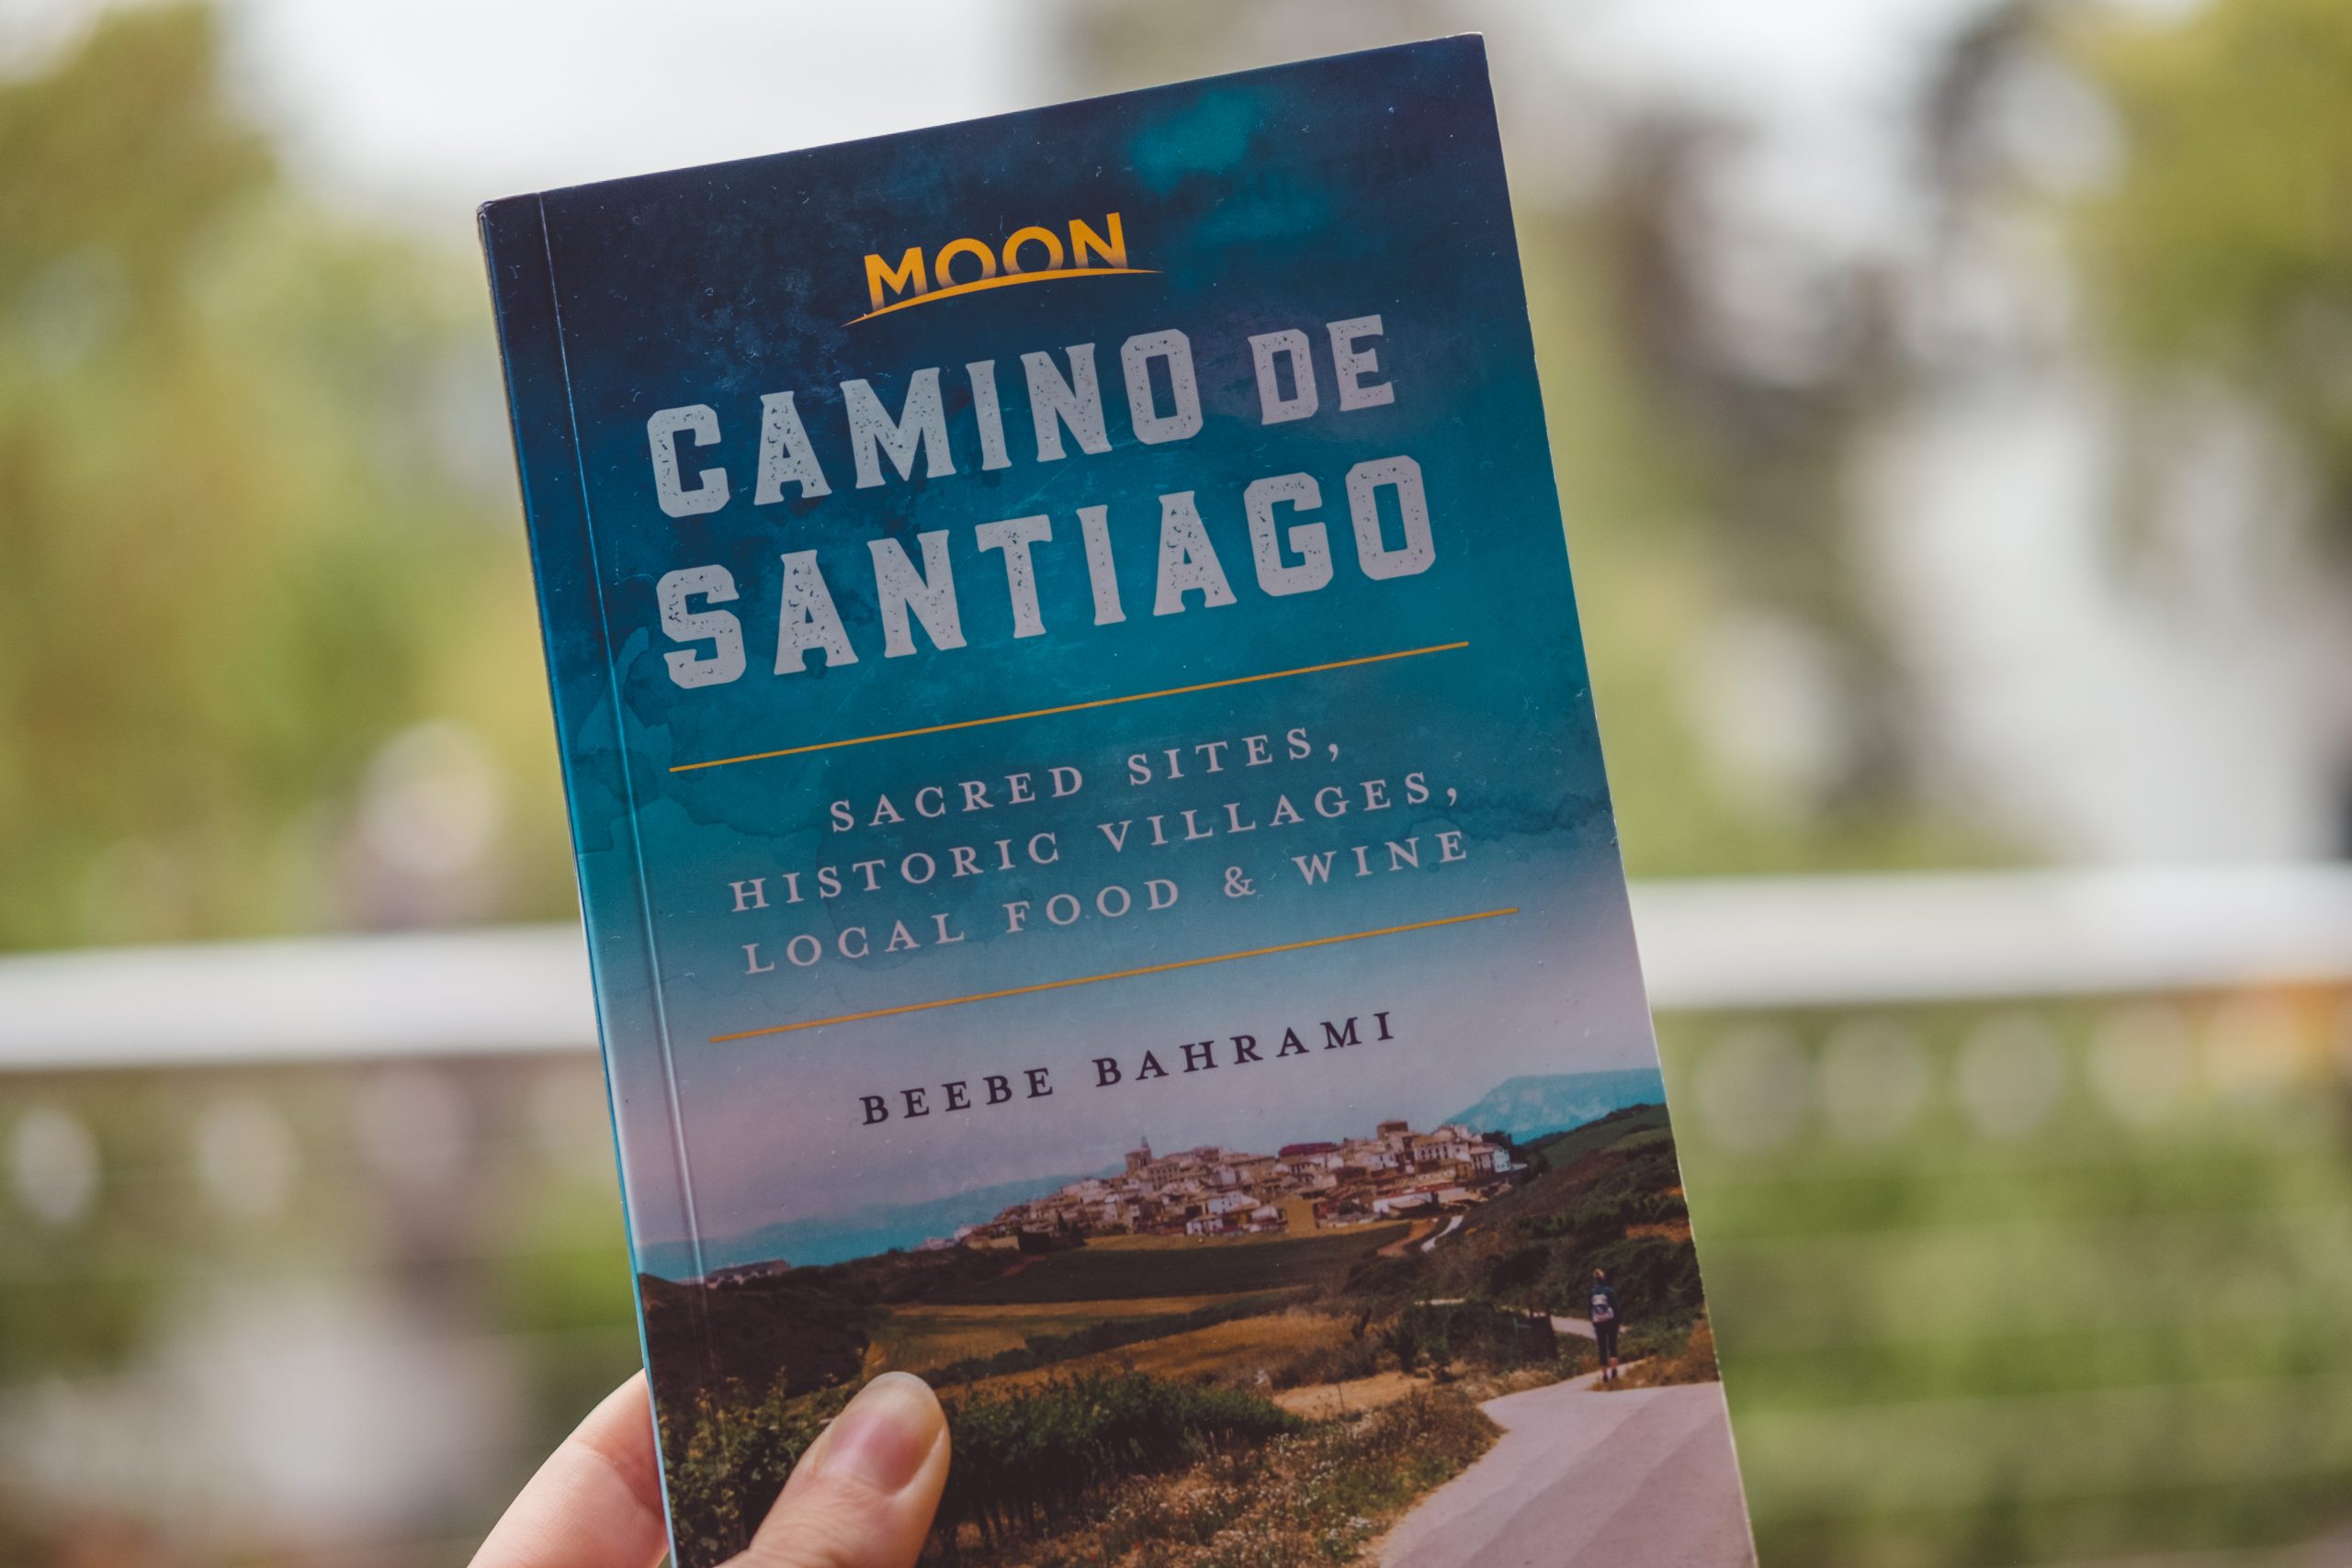 Our awesome Moon Travel Guide to prepare for Camino de Santiago